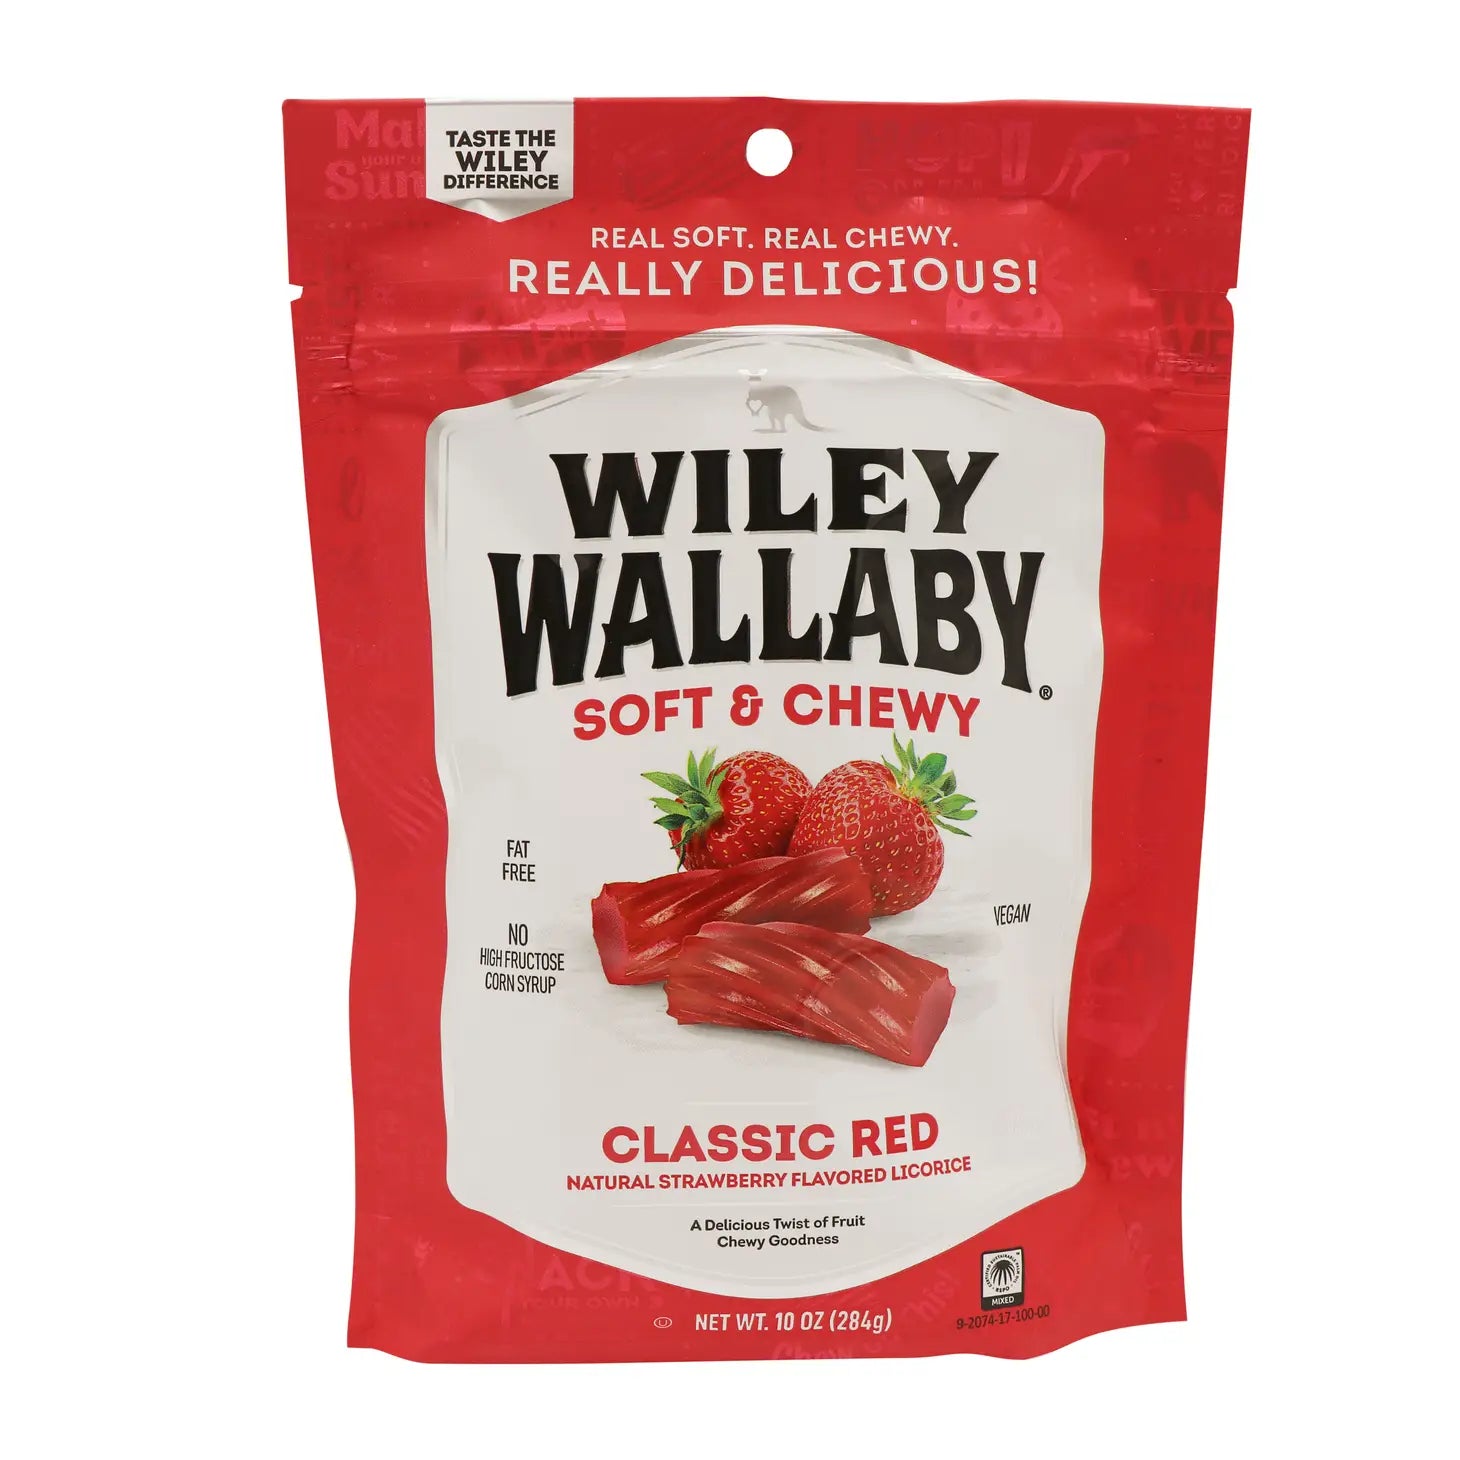 Wiley Wallaby Classic Red Licorice - 10oz